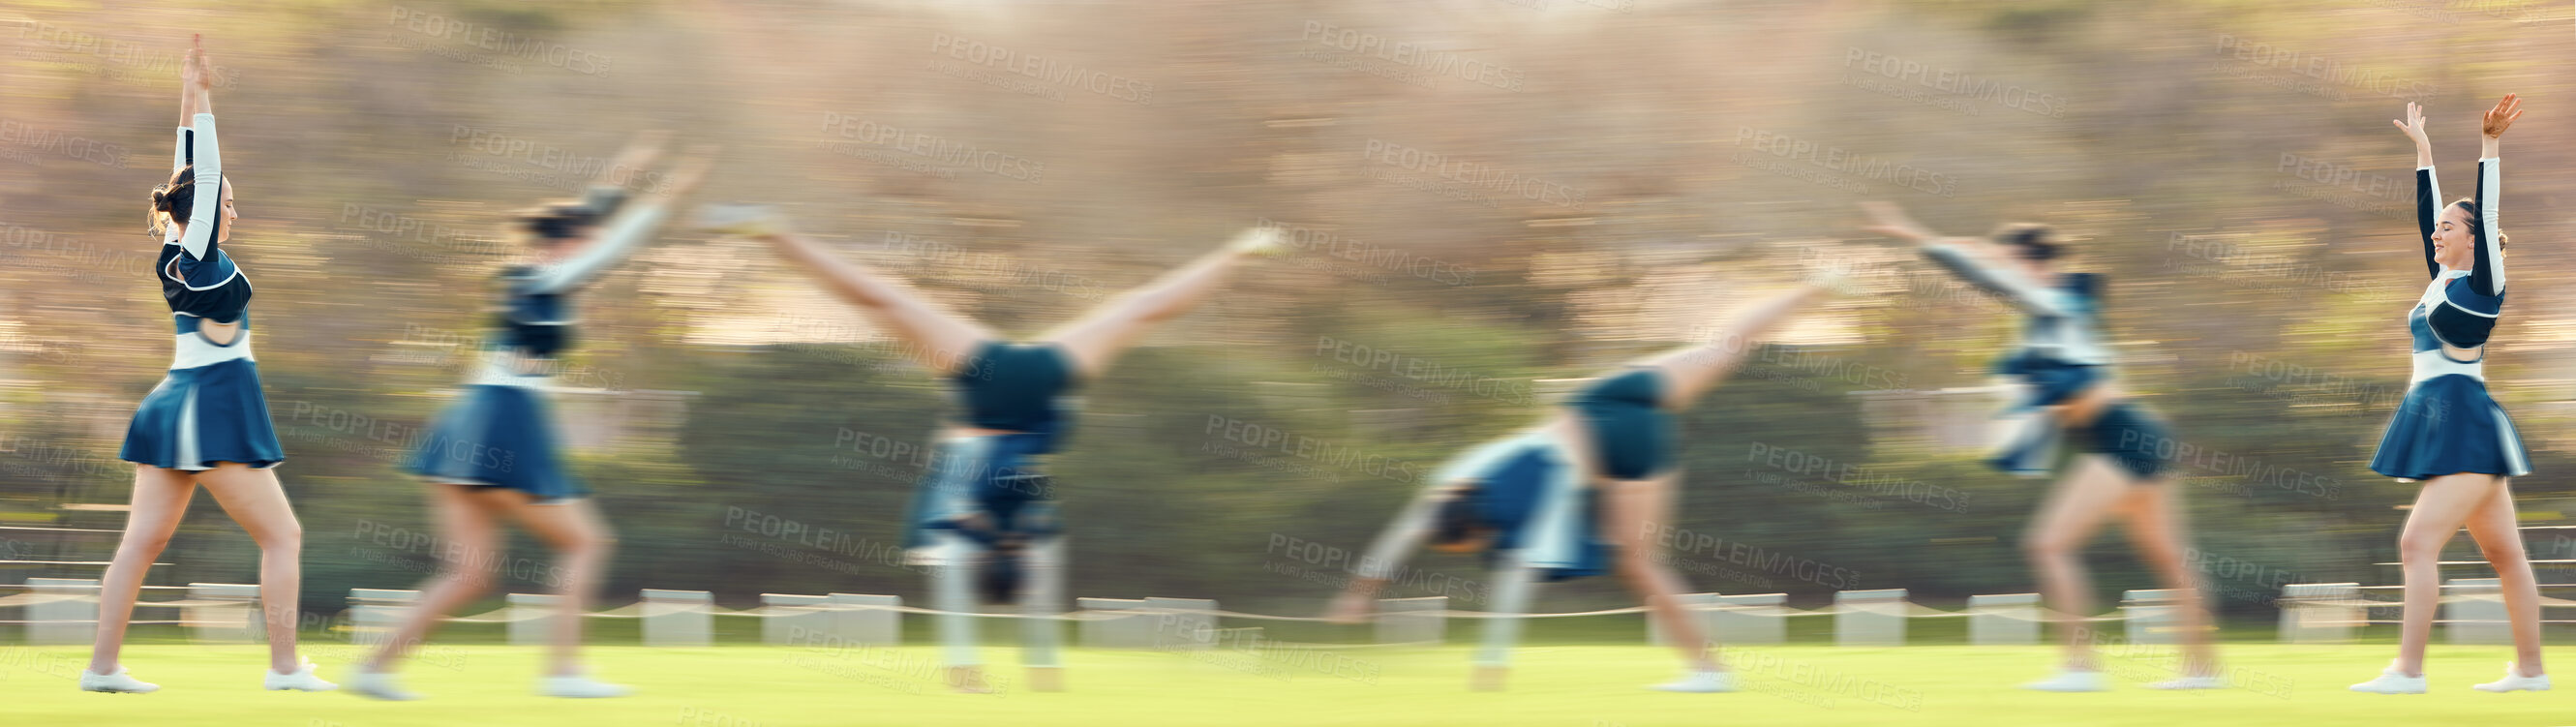 Buy stock photo Sports, athlete and woman doing a cheerleading trick on the field while performing a routine. Fitness, blur motion and female cheerleader doing a cart wheel with skill while practicing or training.